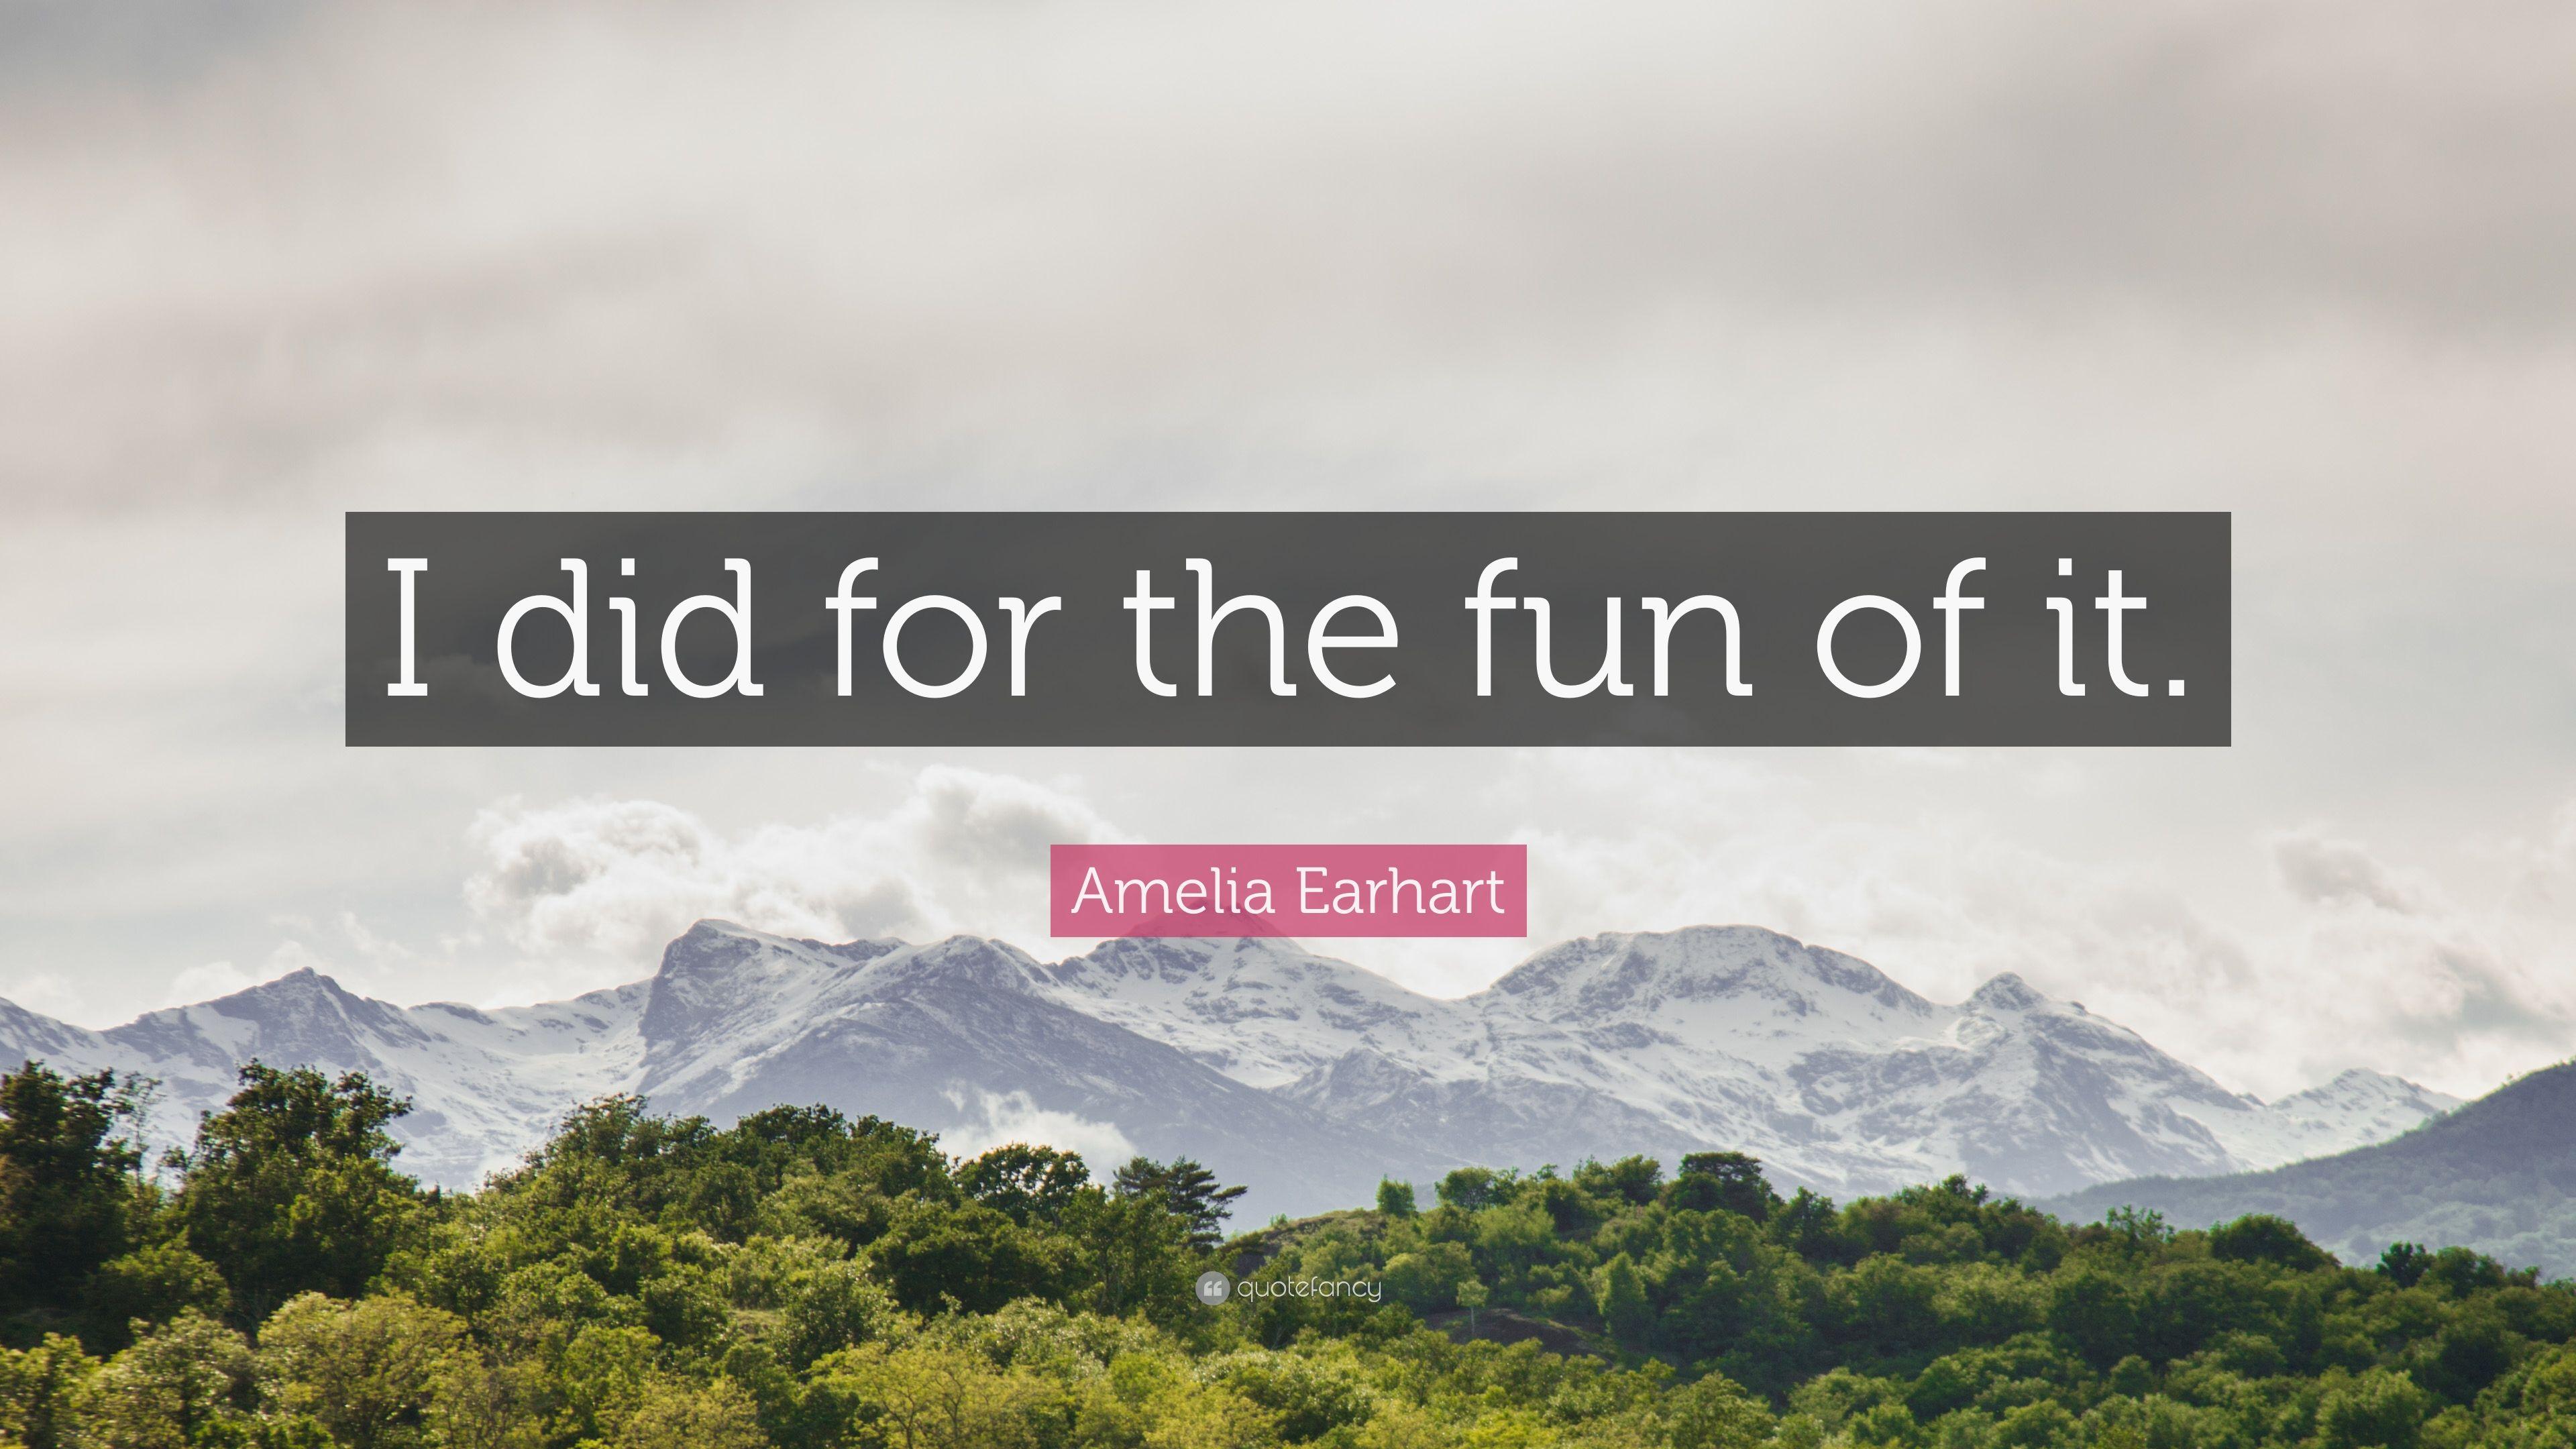 Amelia Earhart Quote: “I did for the fun of it.” 12 wallpaper